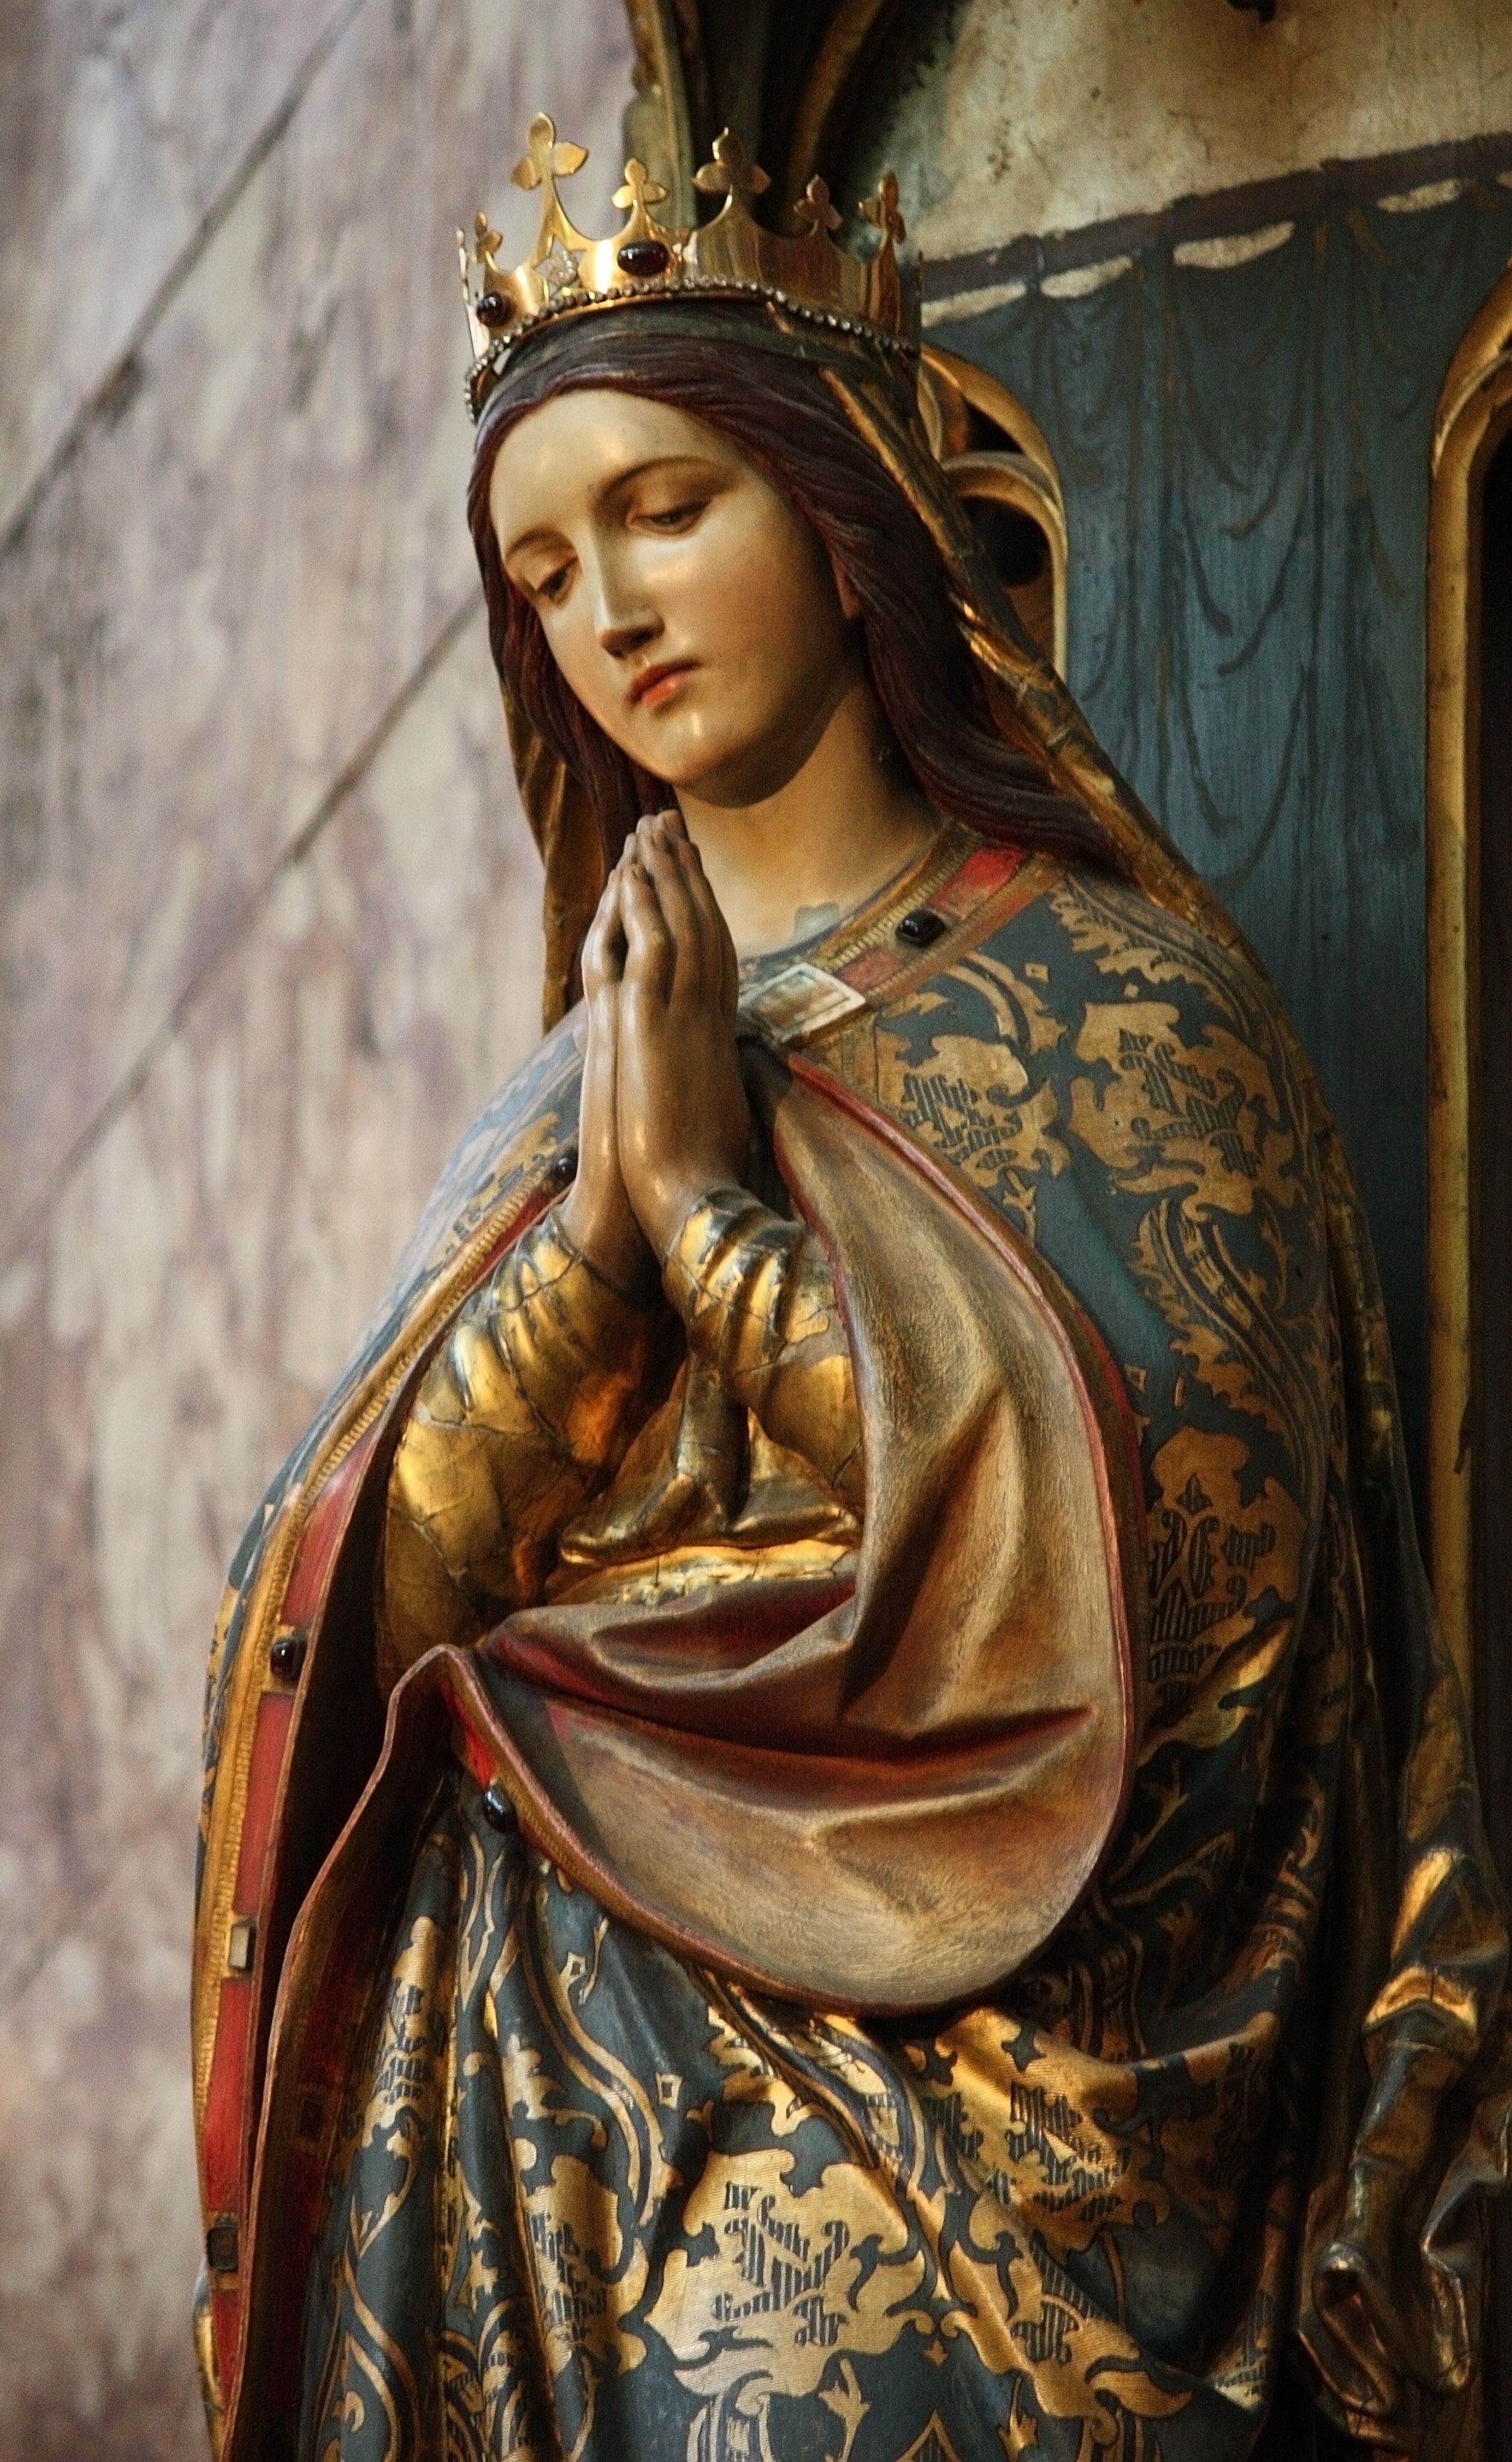 Blessed Virgin Mary Wallpaper. Mi querida Guadalupe